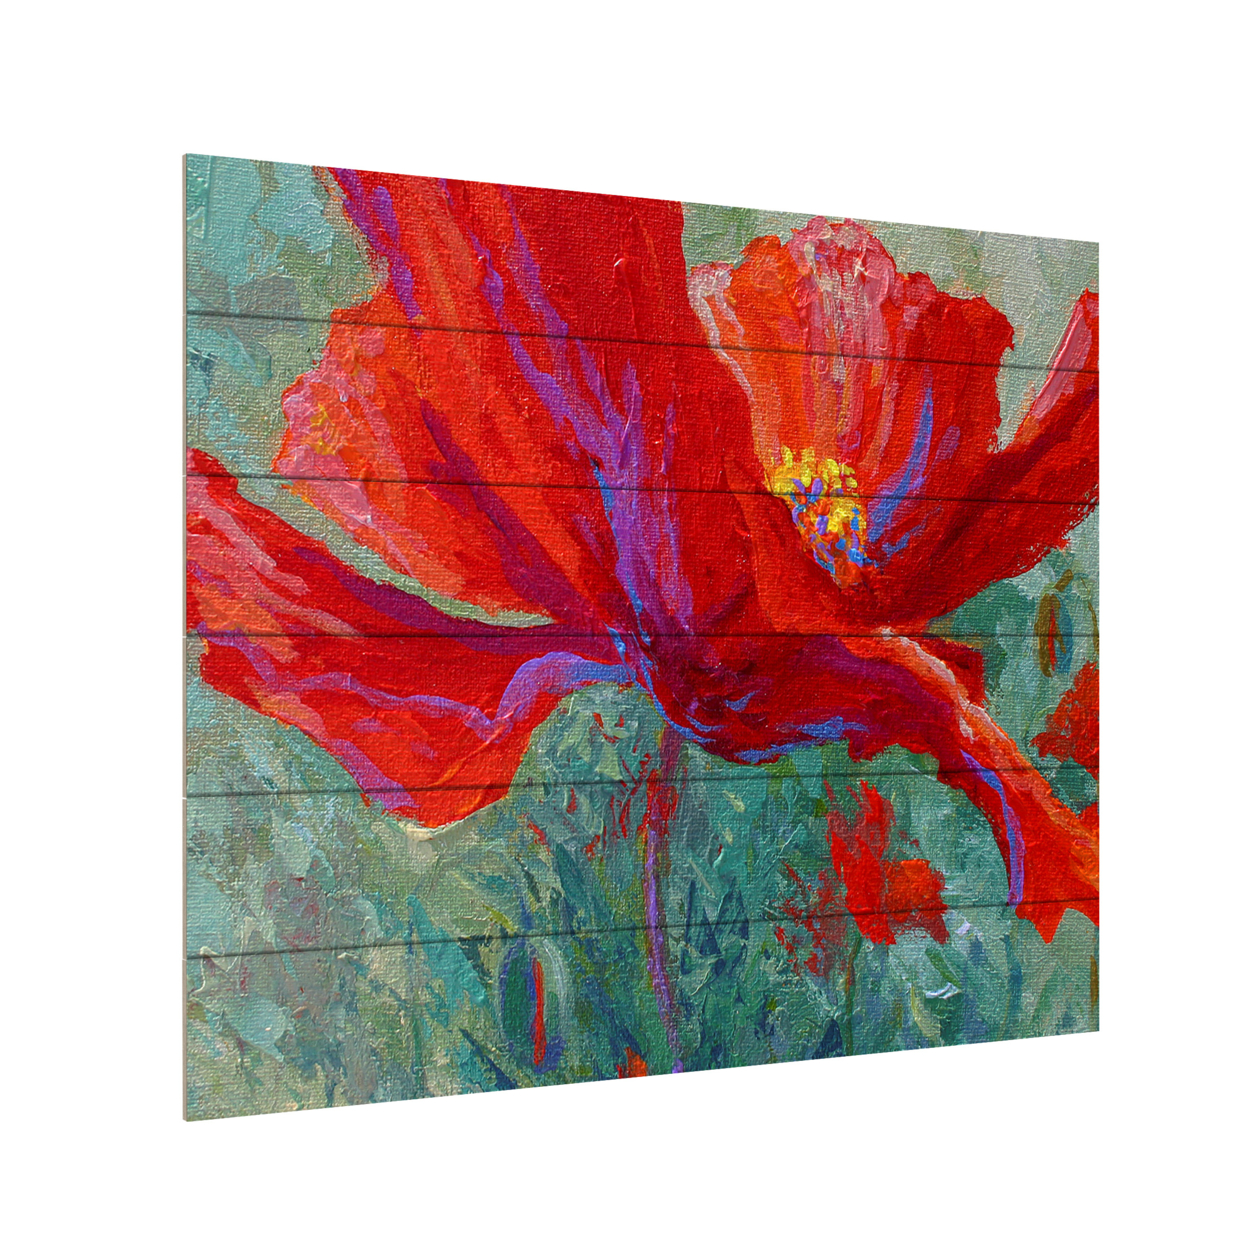 Wooden Slat Art 18 X 22 Inches Titled Red Poppy 1 Ready To Hang Home Decor Picture